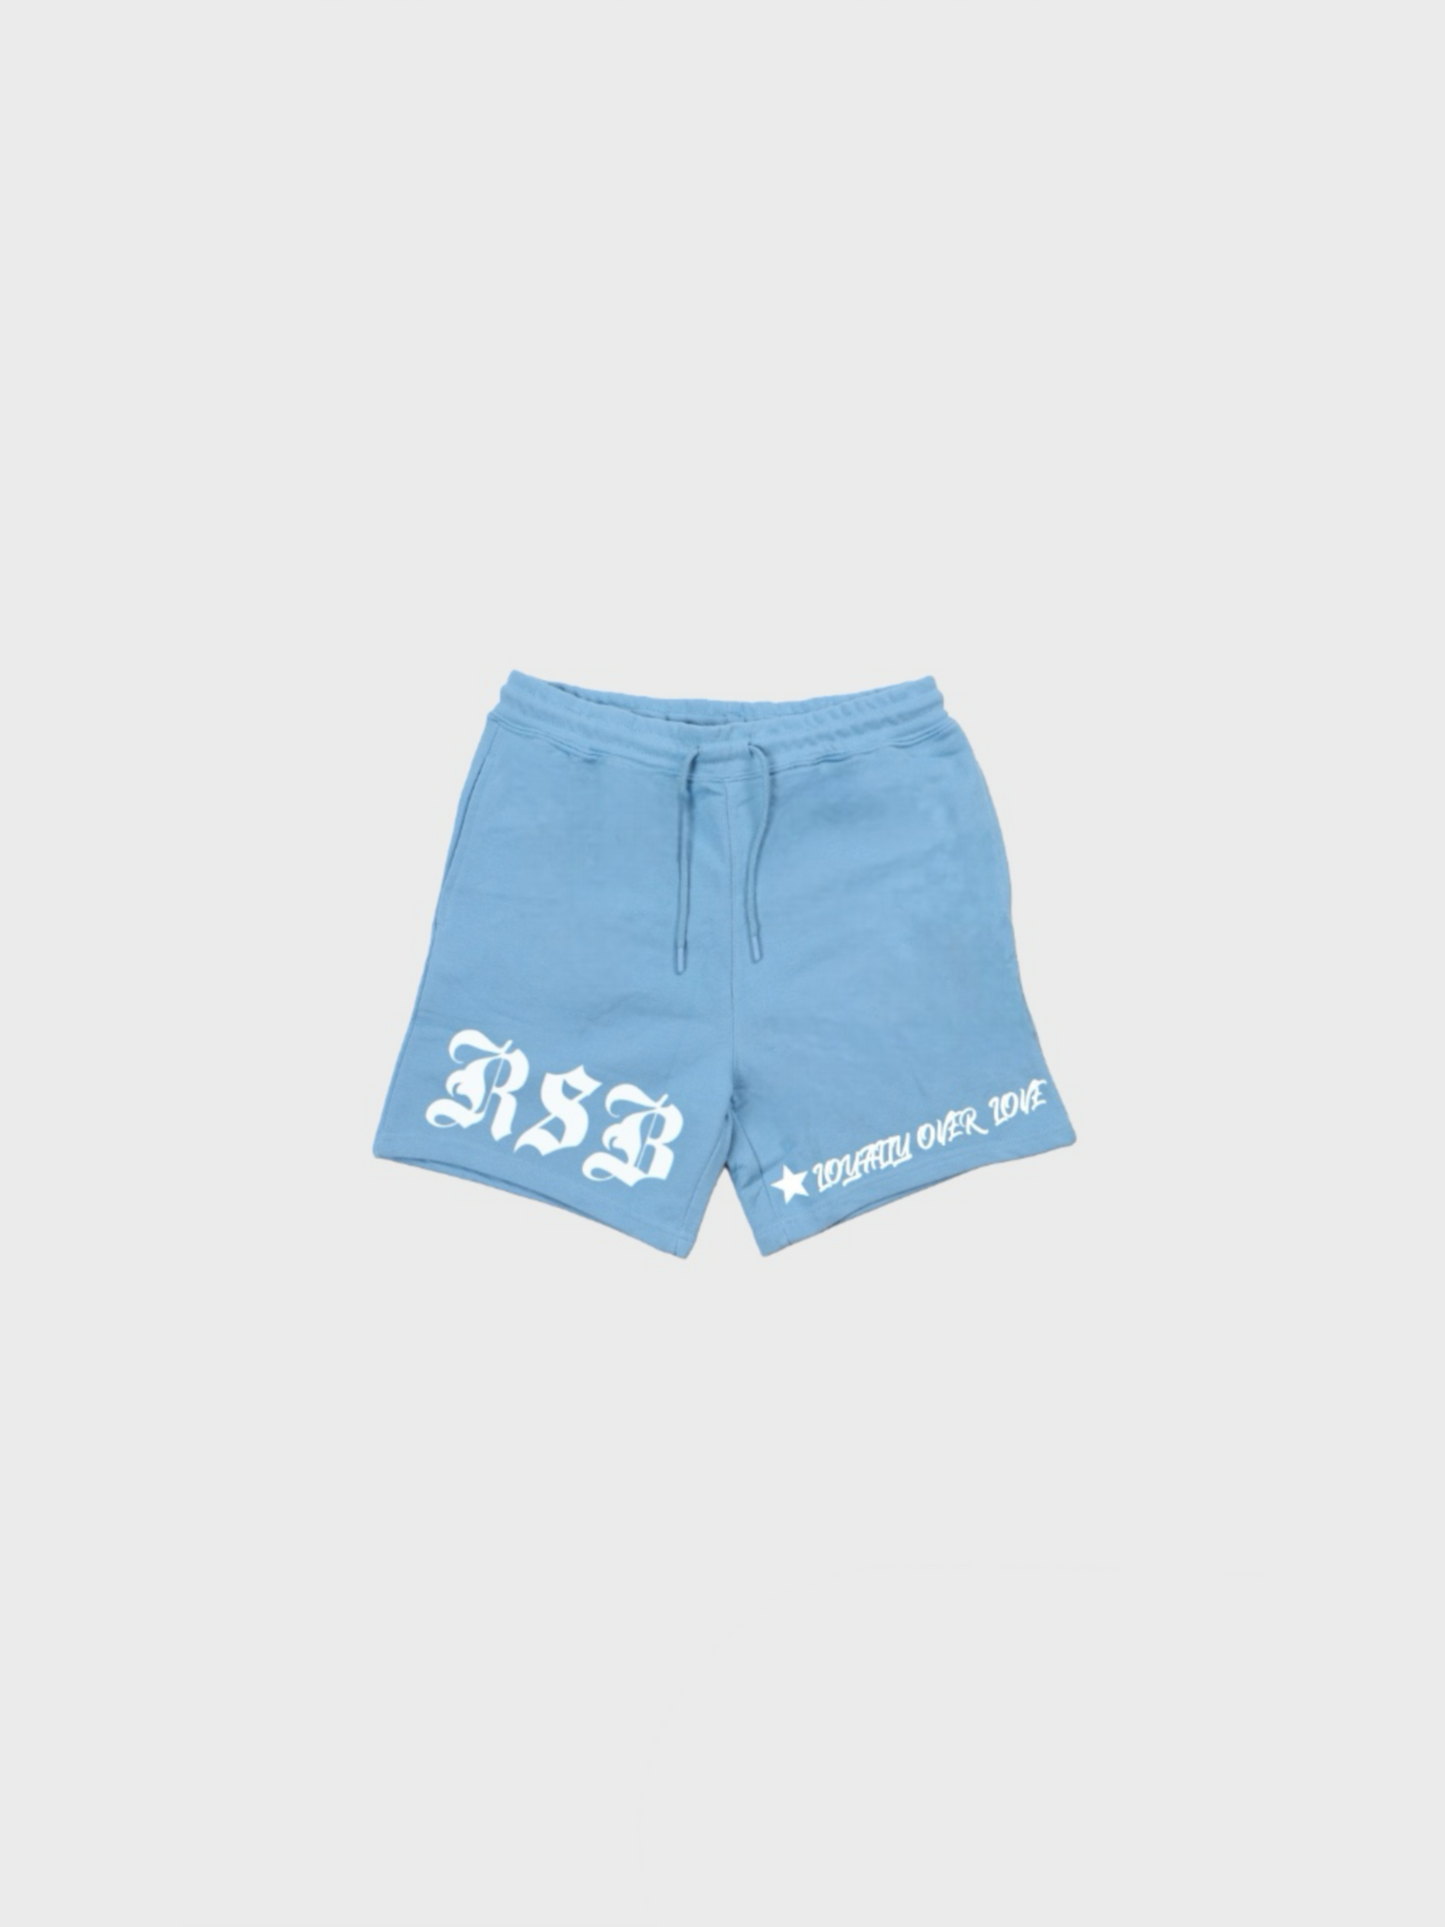 LOYALTY OVER LOVE SHORTS- BLUE/WHITE